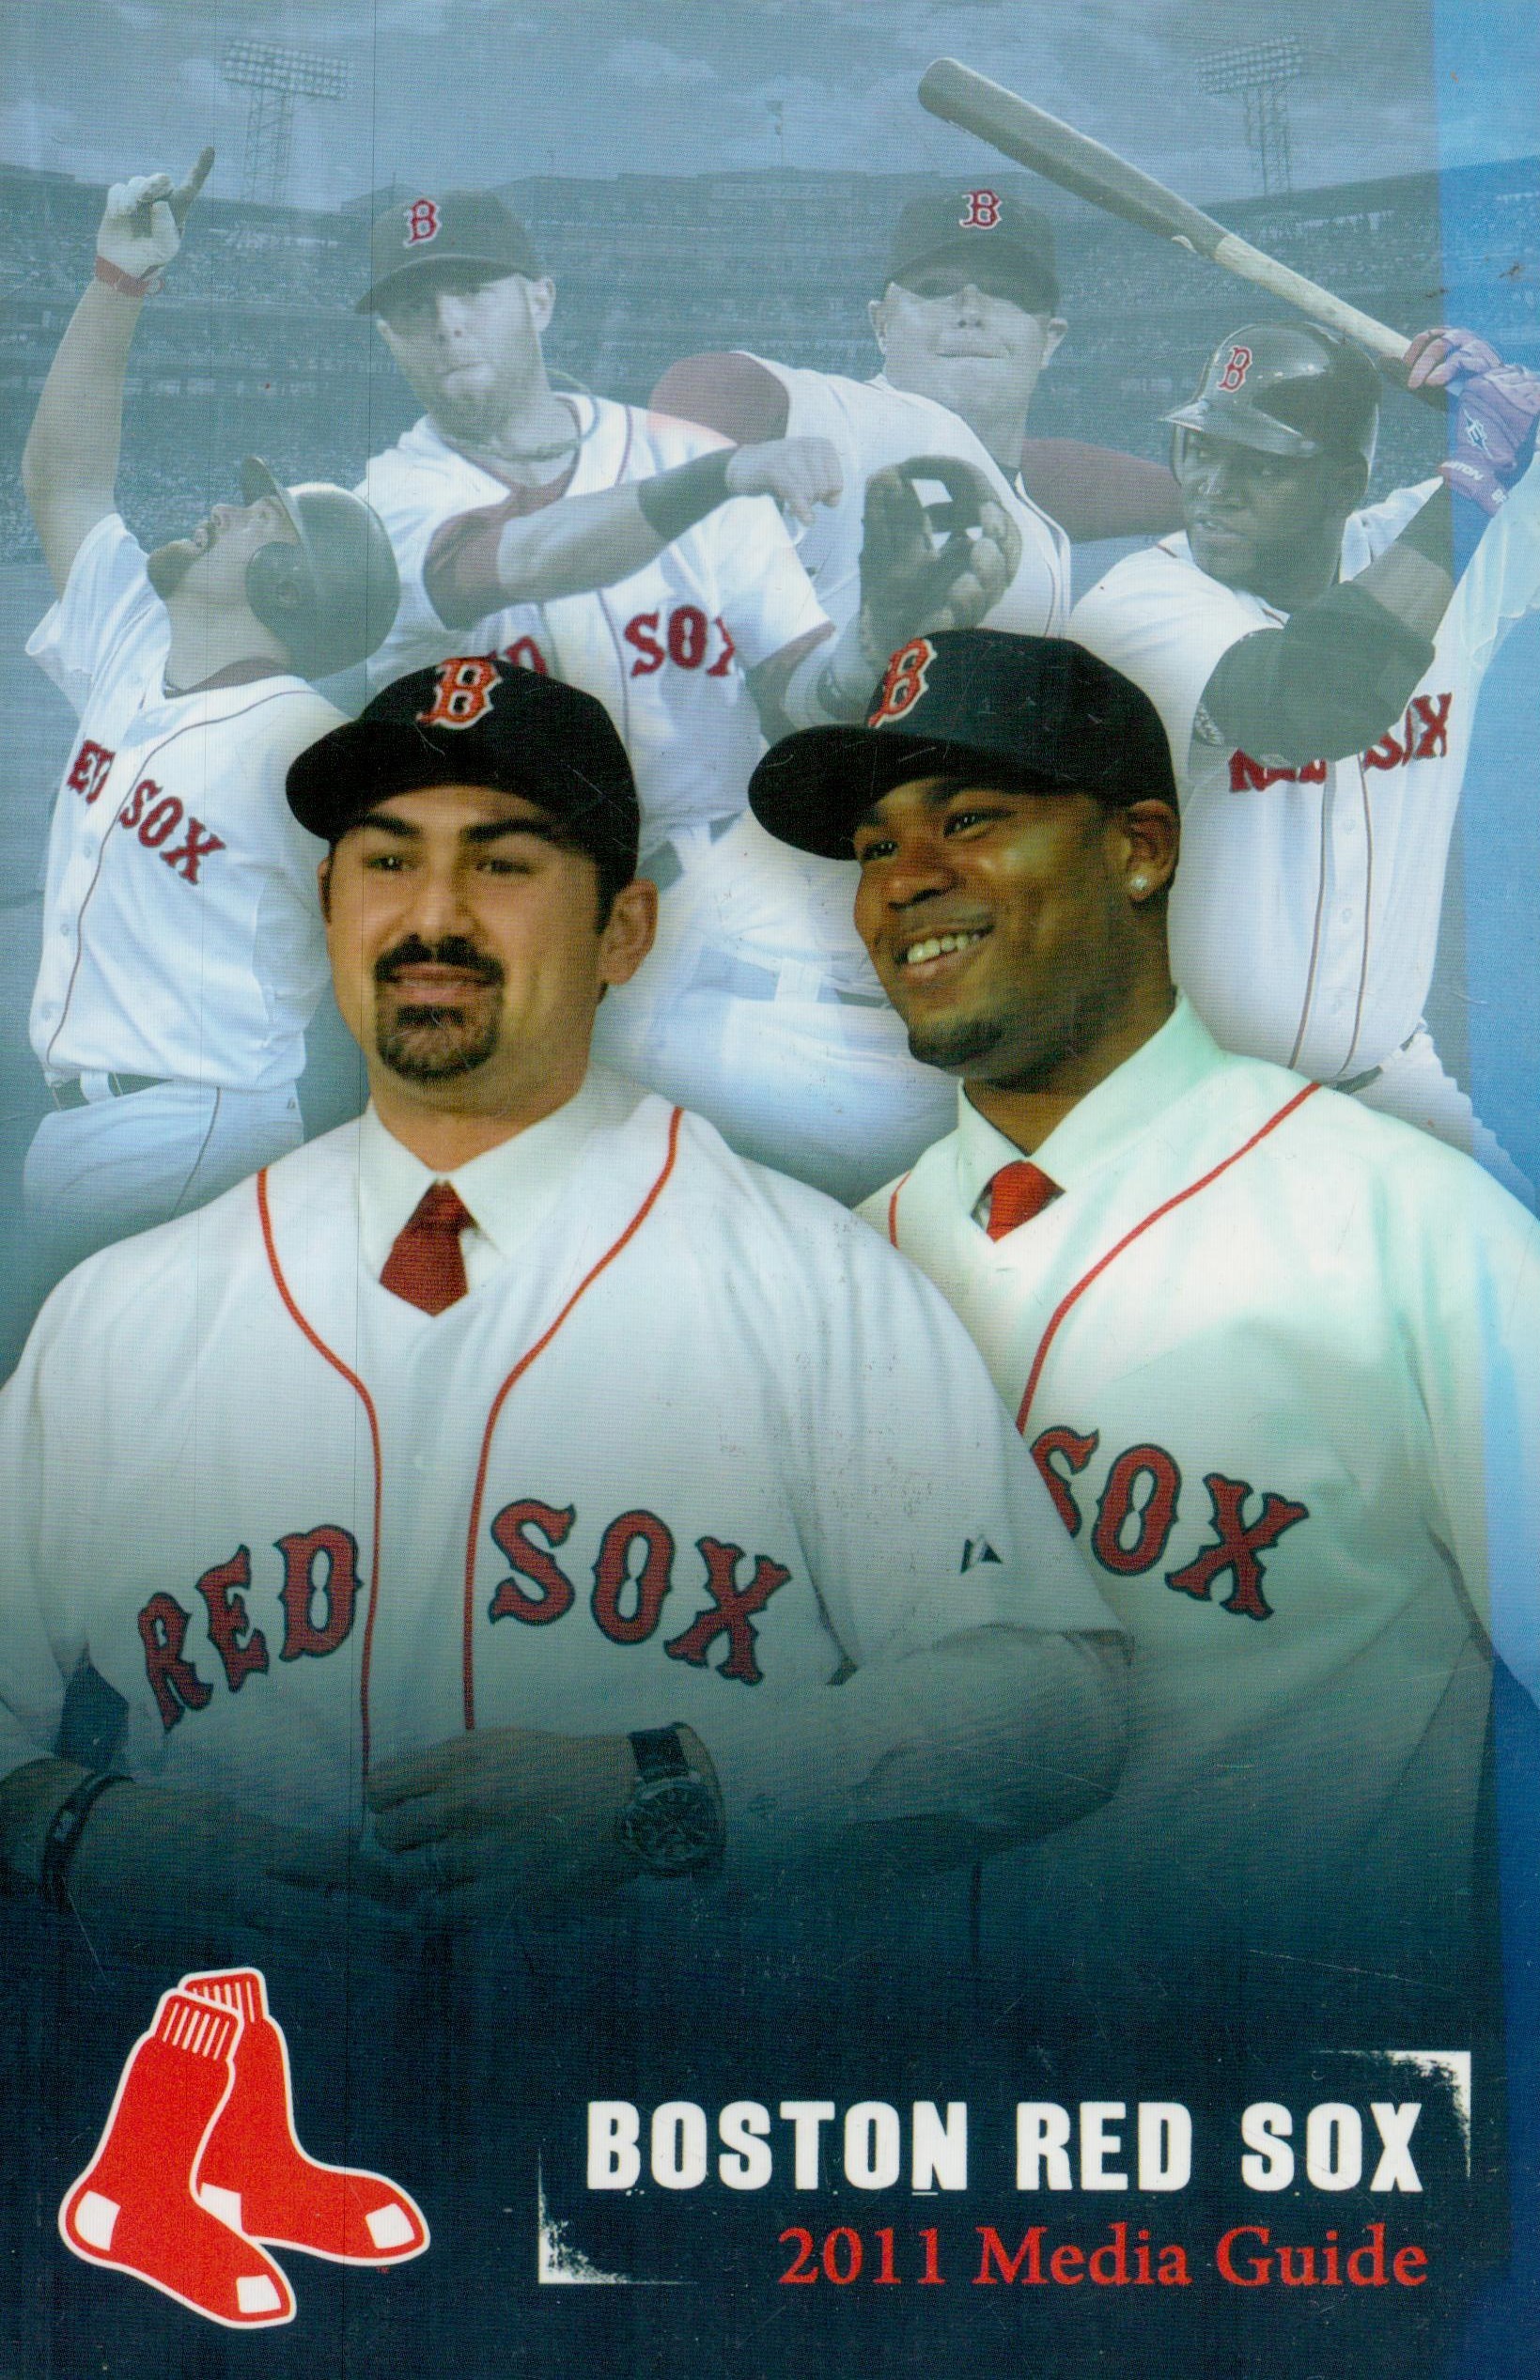 Boston Red Sox 2011 Media Guide Paperback book, 538 pages. Good Condition. All autographs come